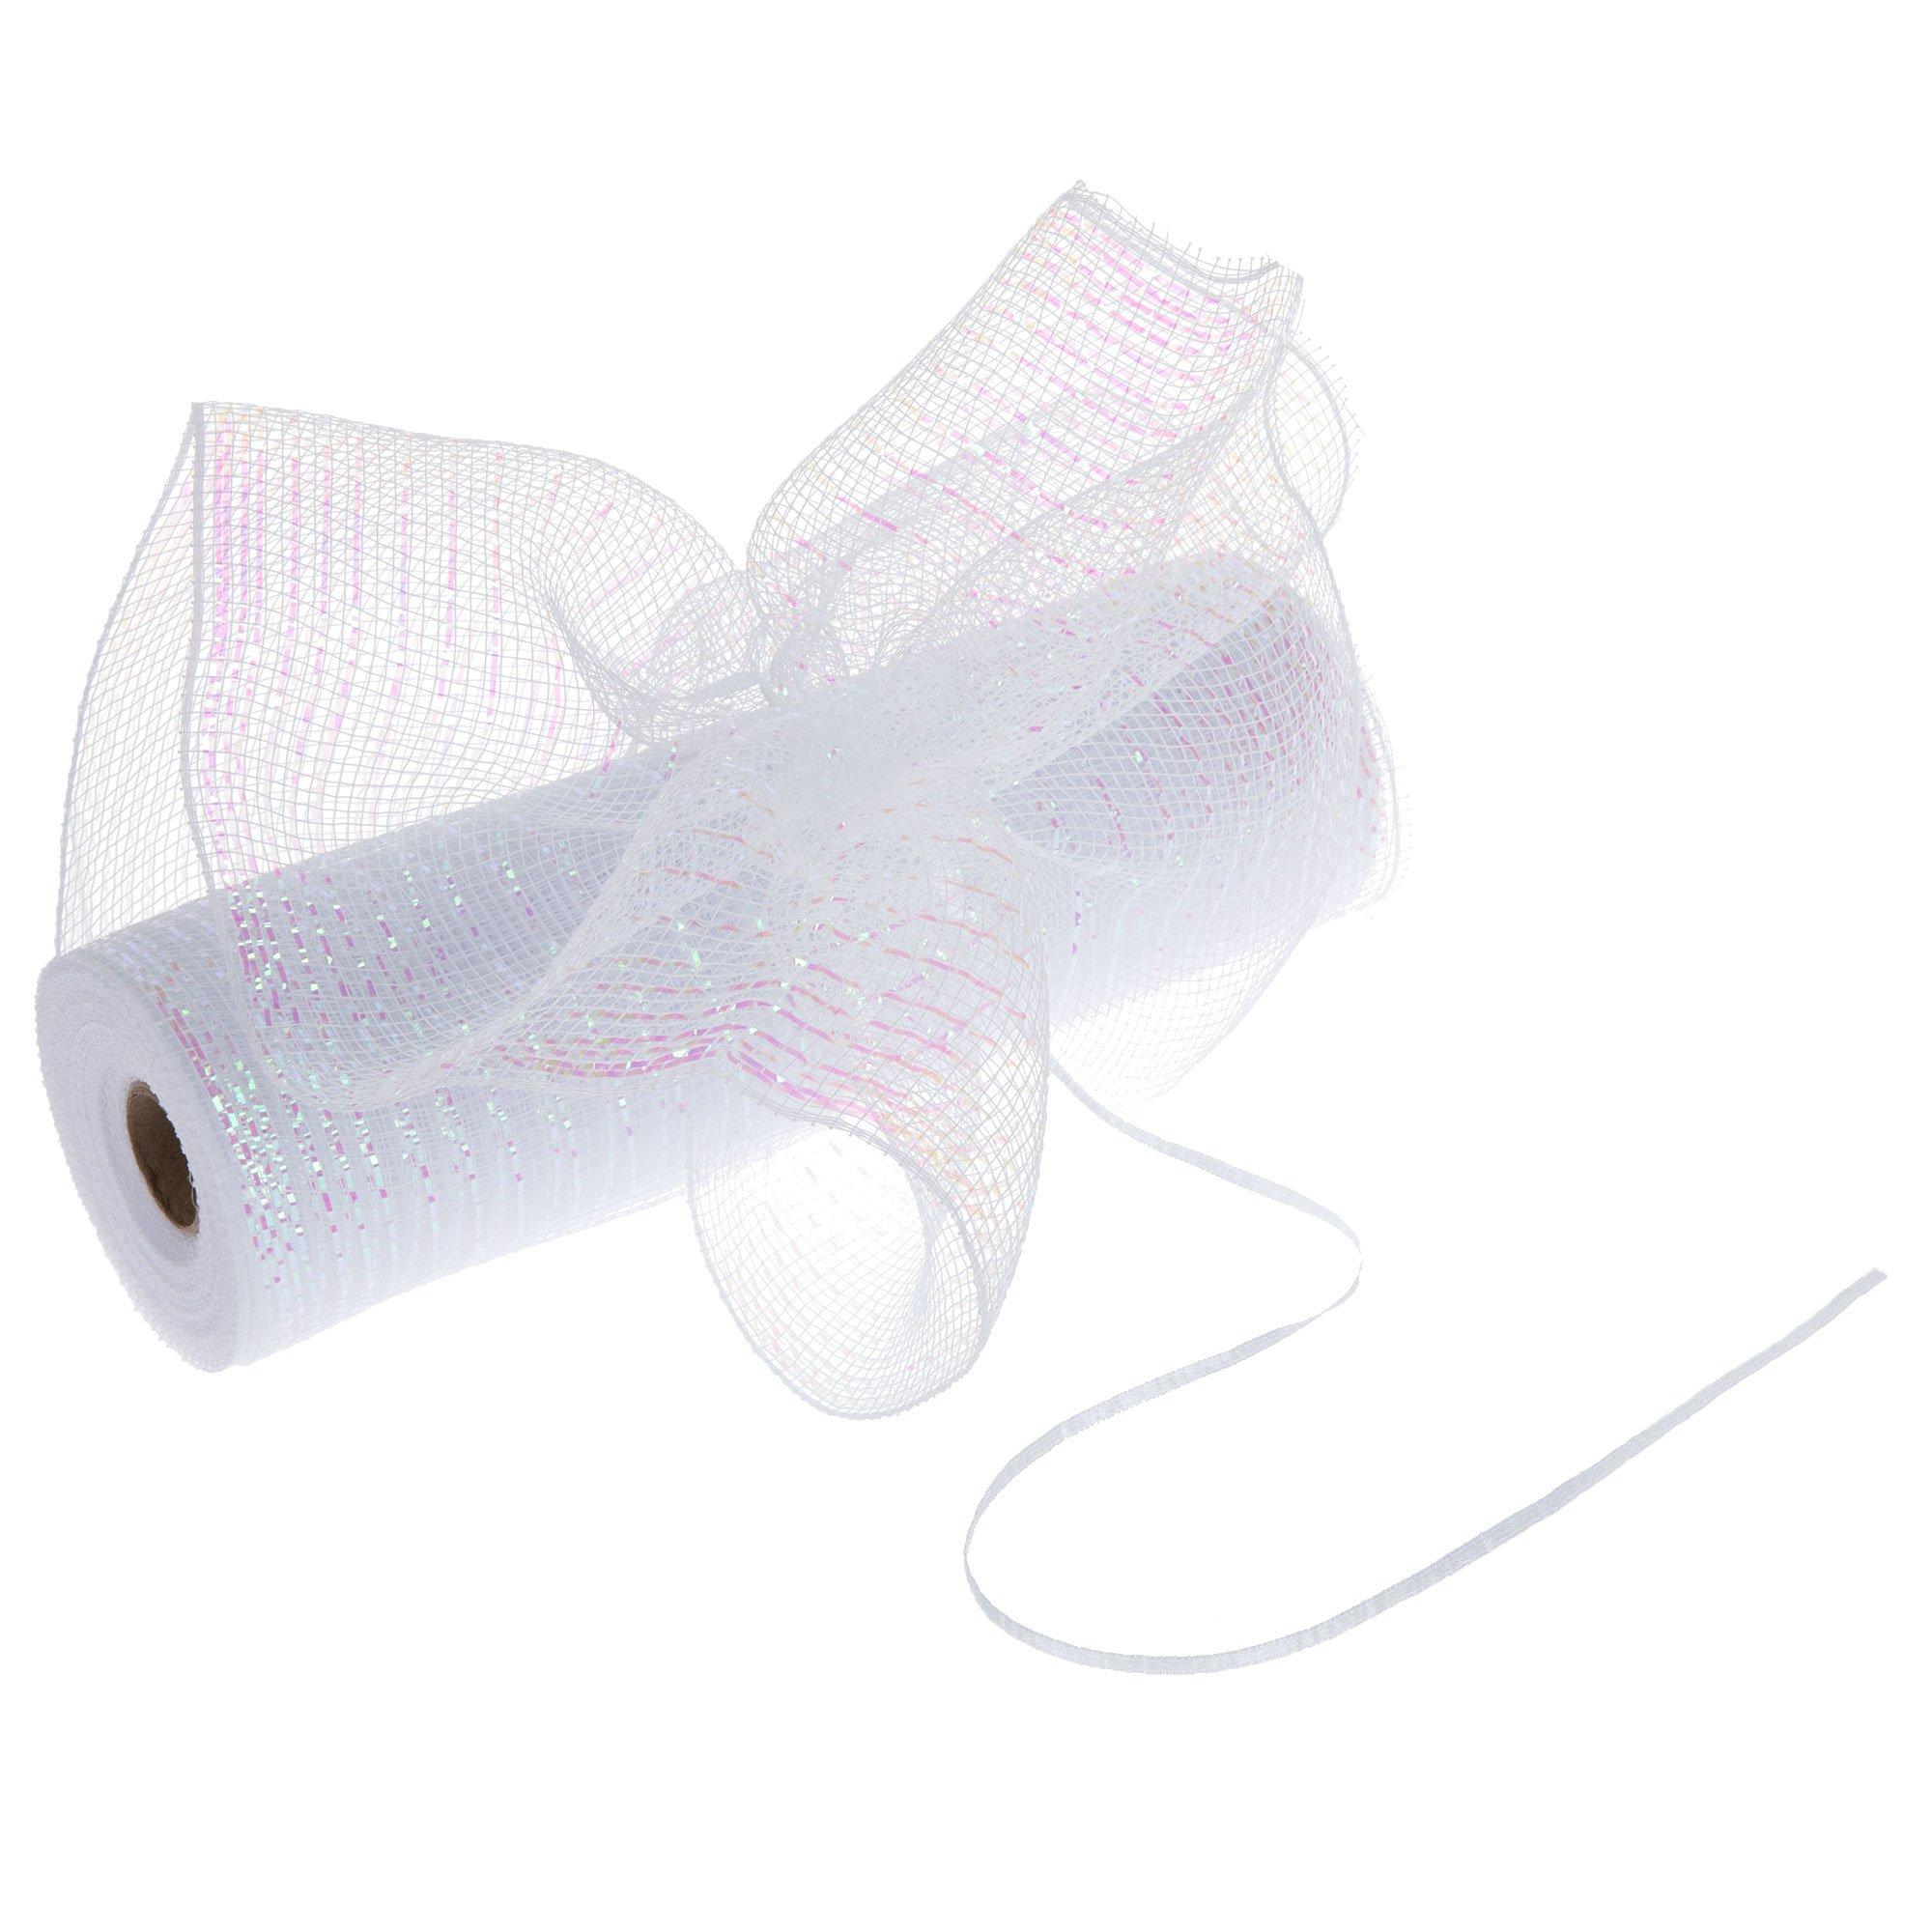 10 x 10 YDS Deco Mesh Ribbon For Wedding Christmas Decorations Mesh Roll -  Lavender, 1 Pack - Dillons Food Stores